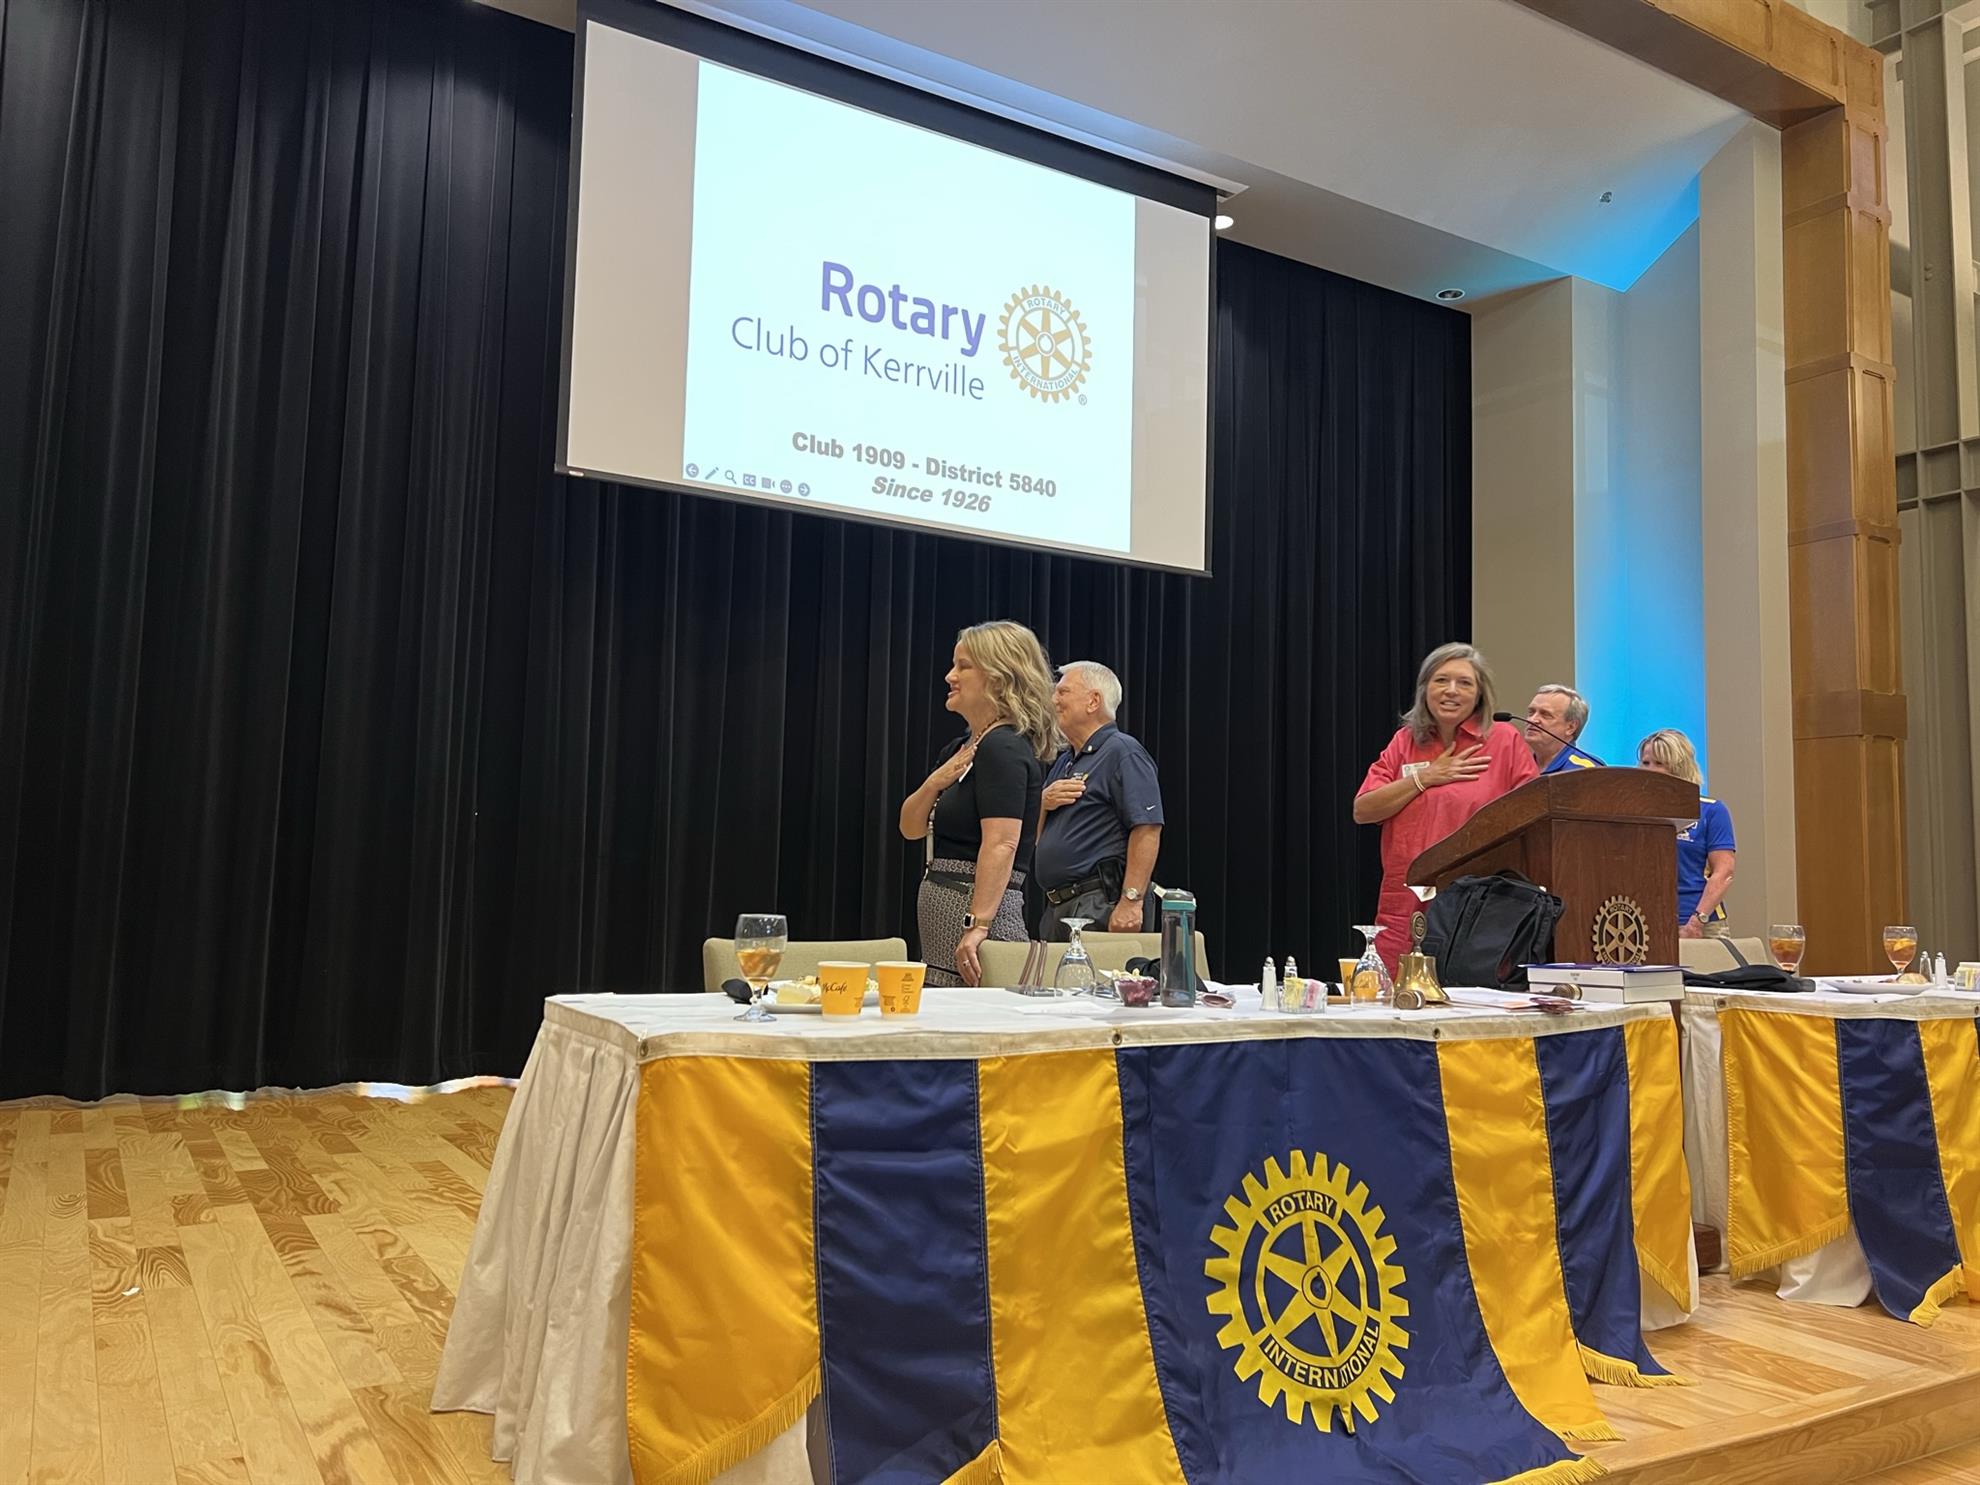 Stories Rotary Club of Kerrville pic